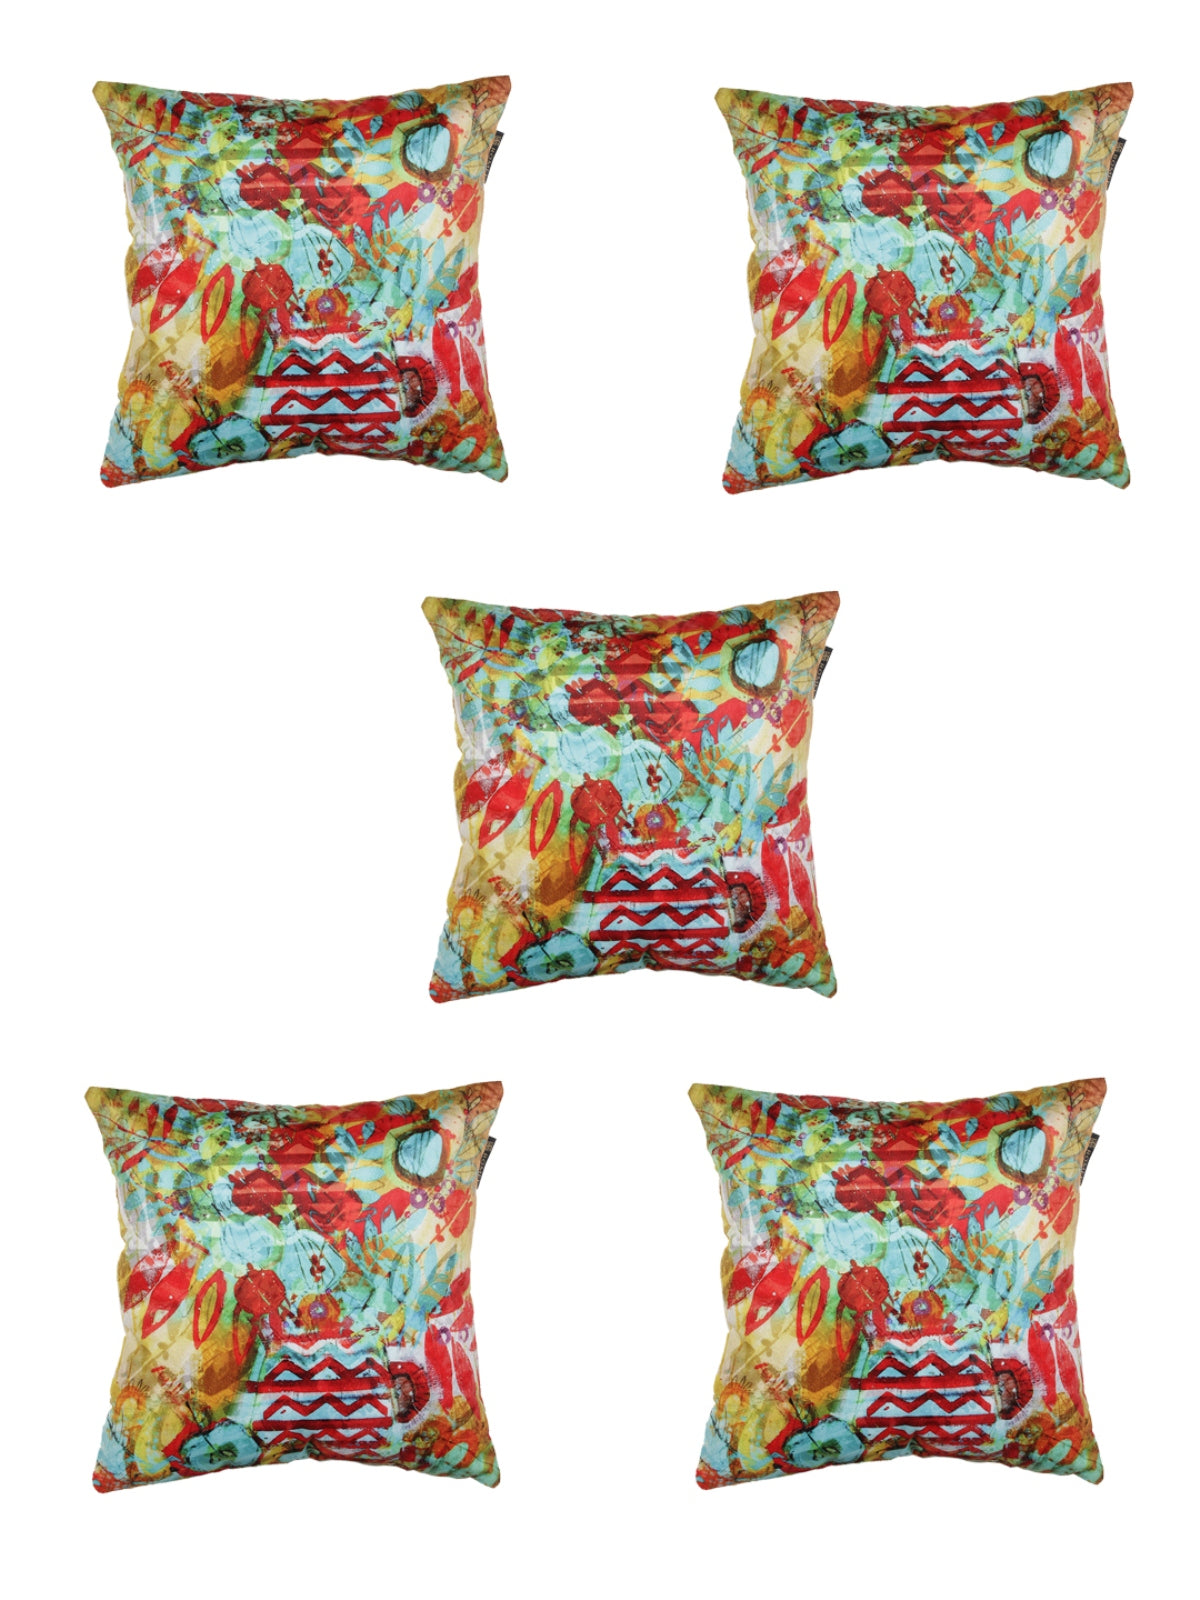 Polyester Velvet Fabric Abstract Printed Cushion Cover 16x16 Set of 5 - Multicolor